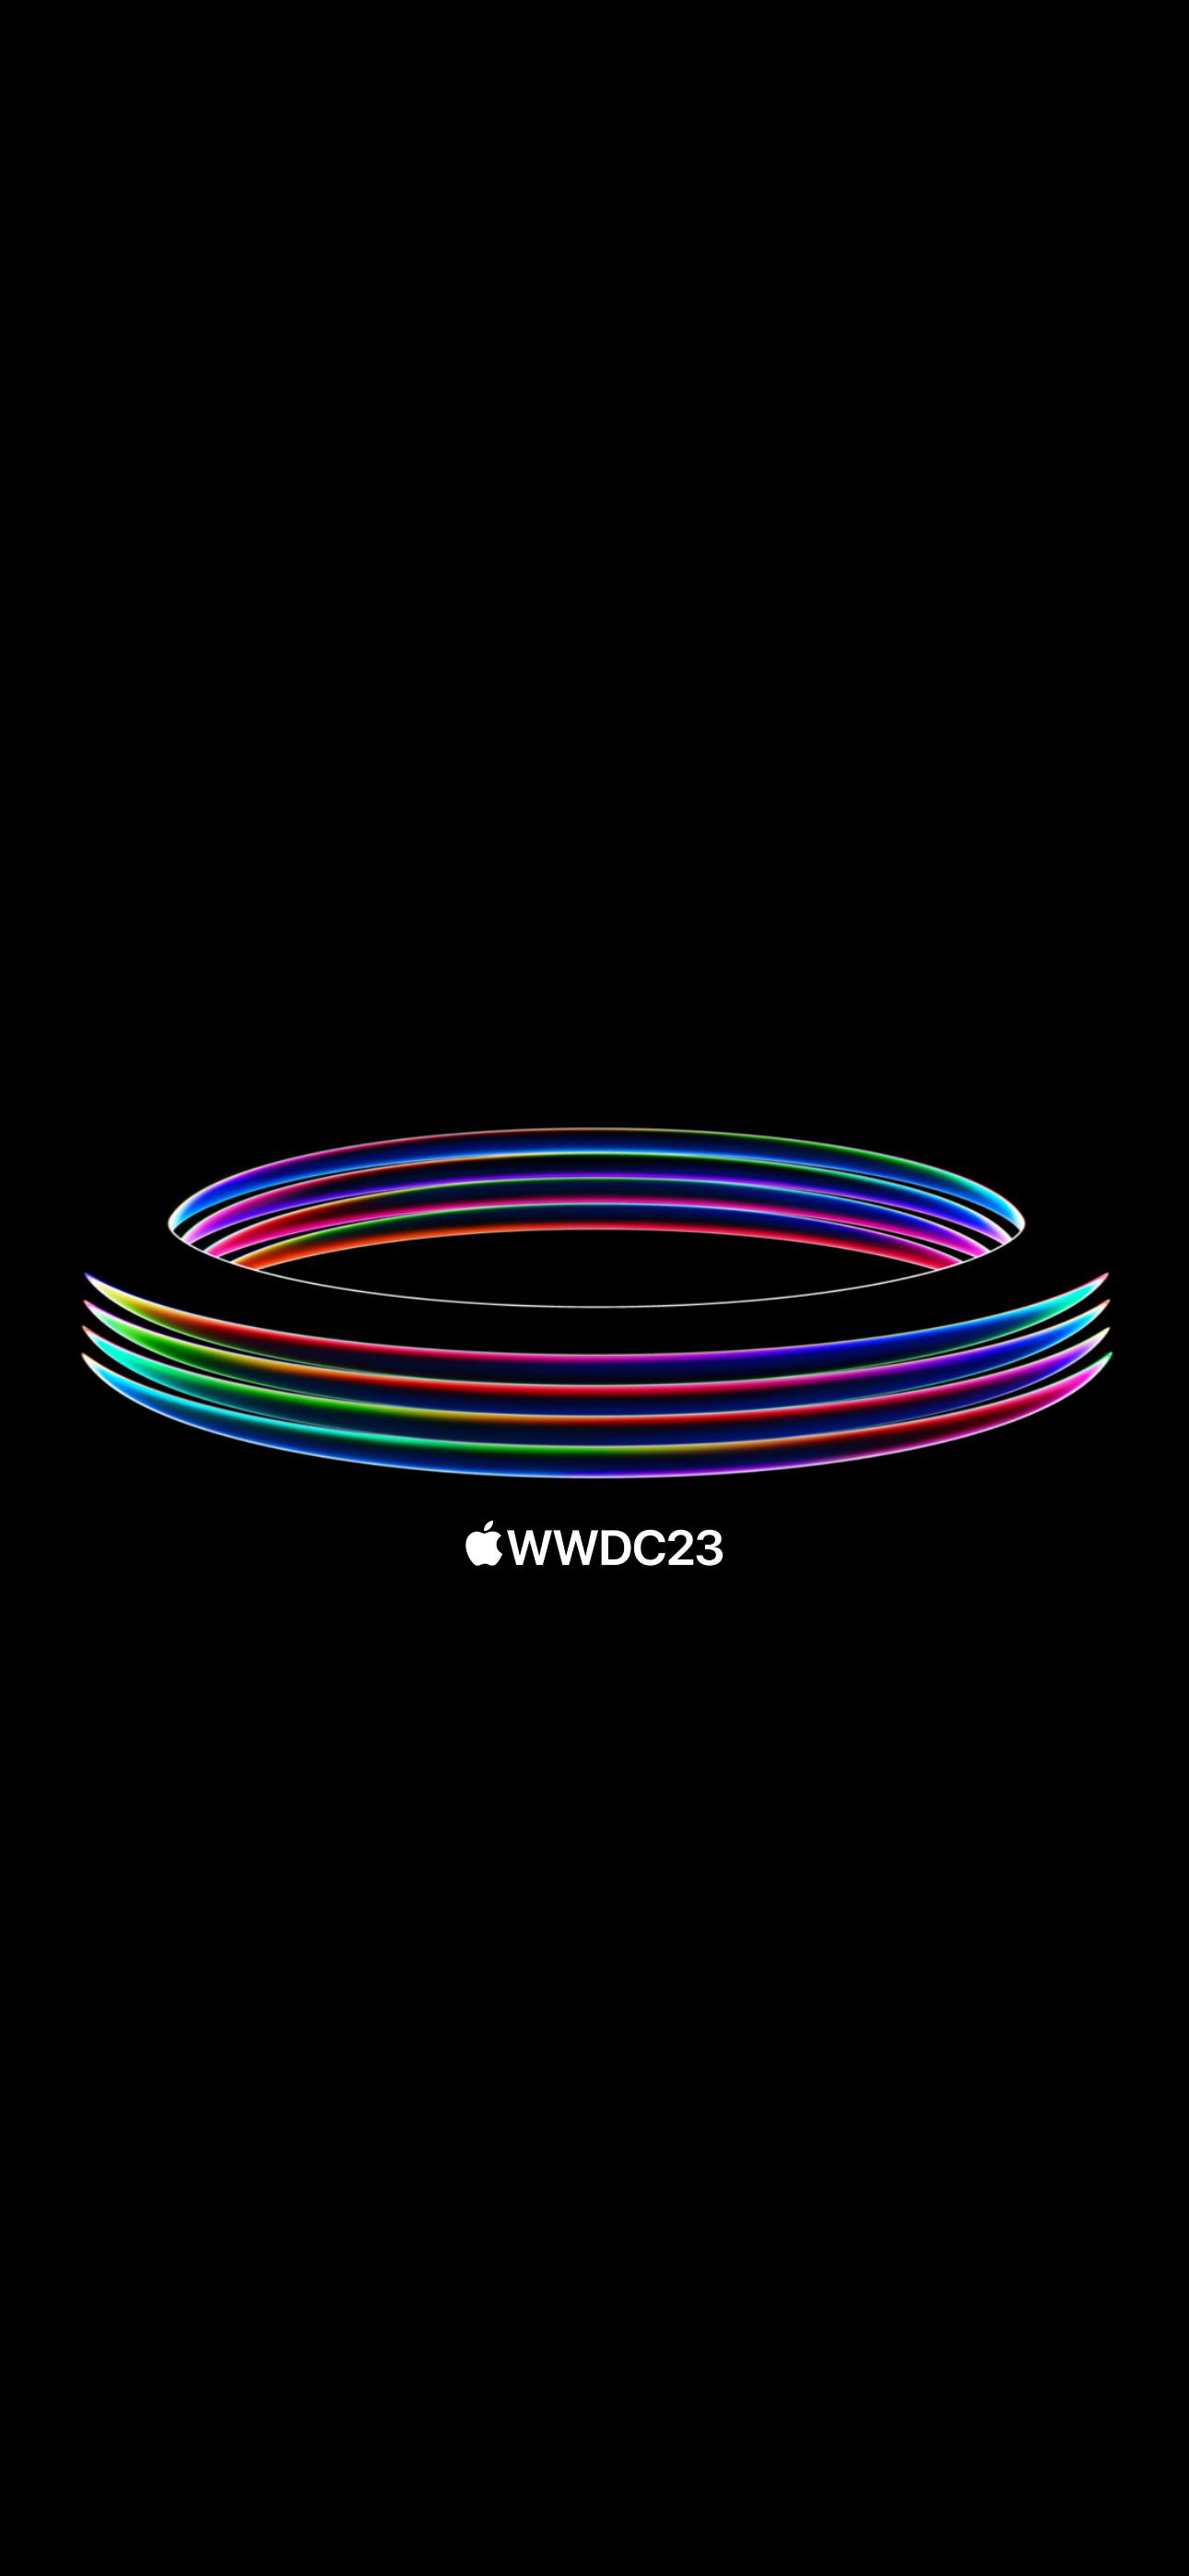 Download the WWDC 2023 wallpapers right here